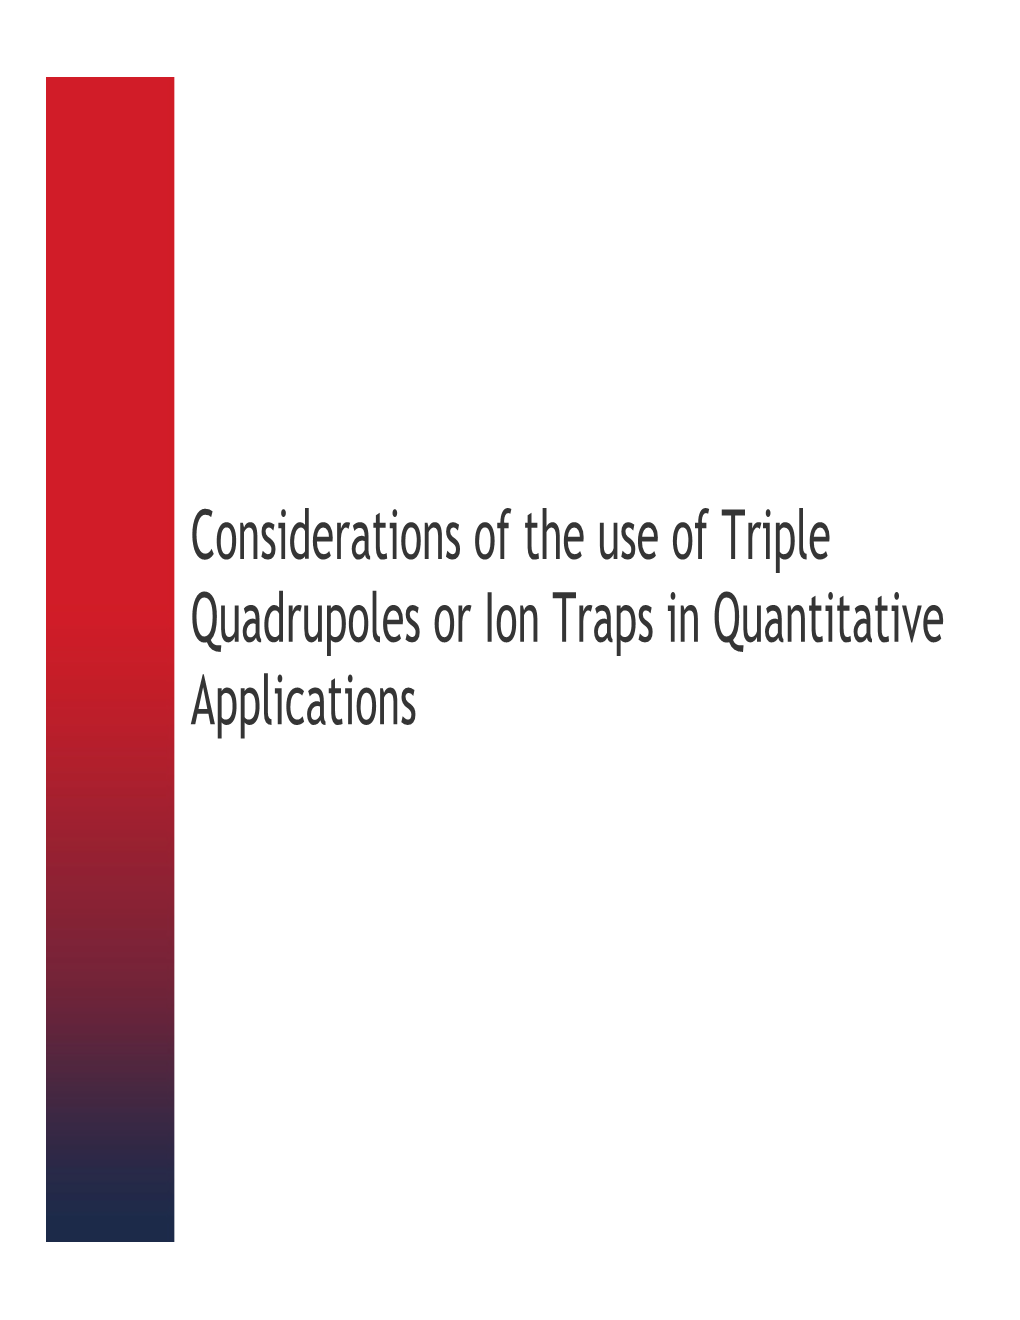 Considerations of the Use of Triple Quadrupoles Or Ion Traps in Quantitative Applications Triple Stage Quadrupole API MS / MS Full Scan Products